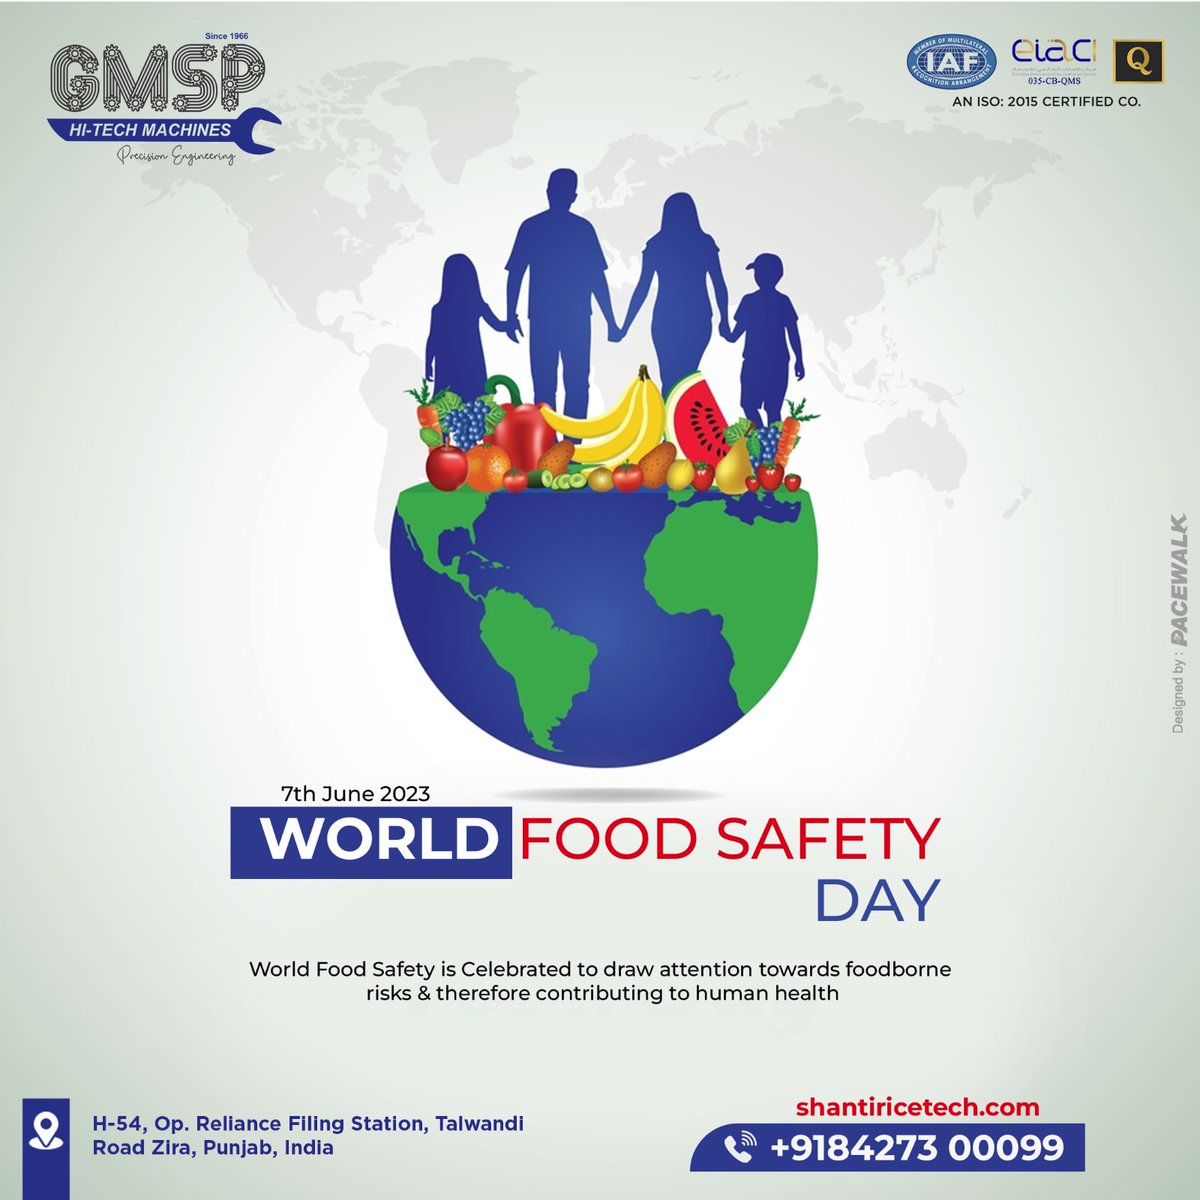 📷📷 Ensuring Food Safety for a Healthier World! 📷📷

#WorldFoodSafetyDay #FoodSafety #NutritionMatters #SafeFoodForAll #HealthyEating #FoodSecurity #SustainableFood #zira #Punjab #gmsphitech #hitechmachines